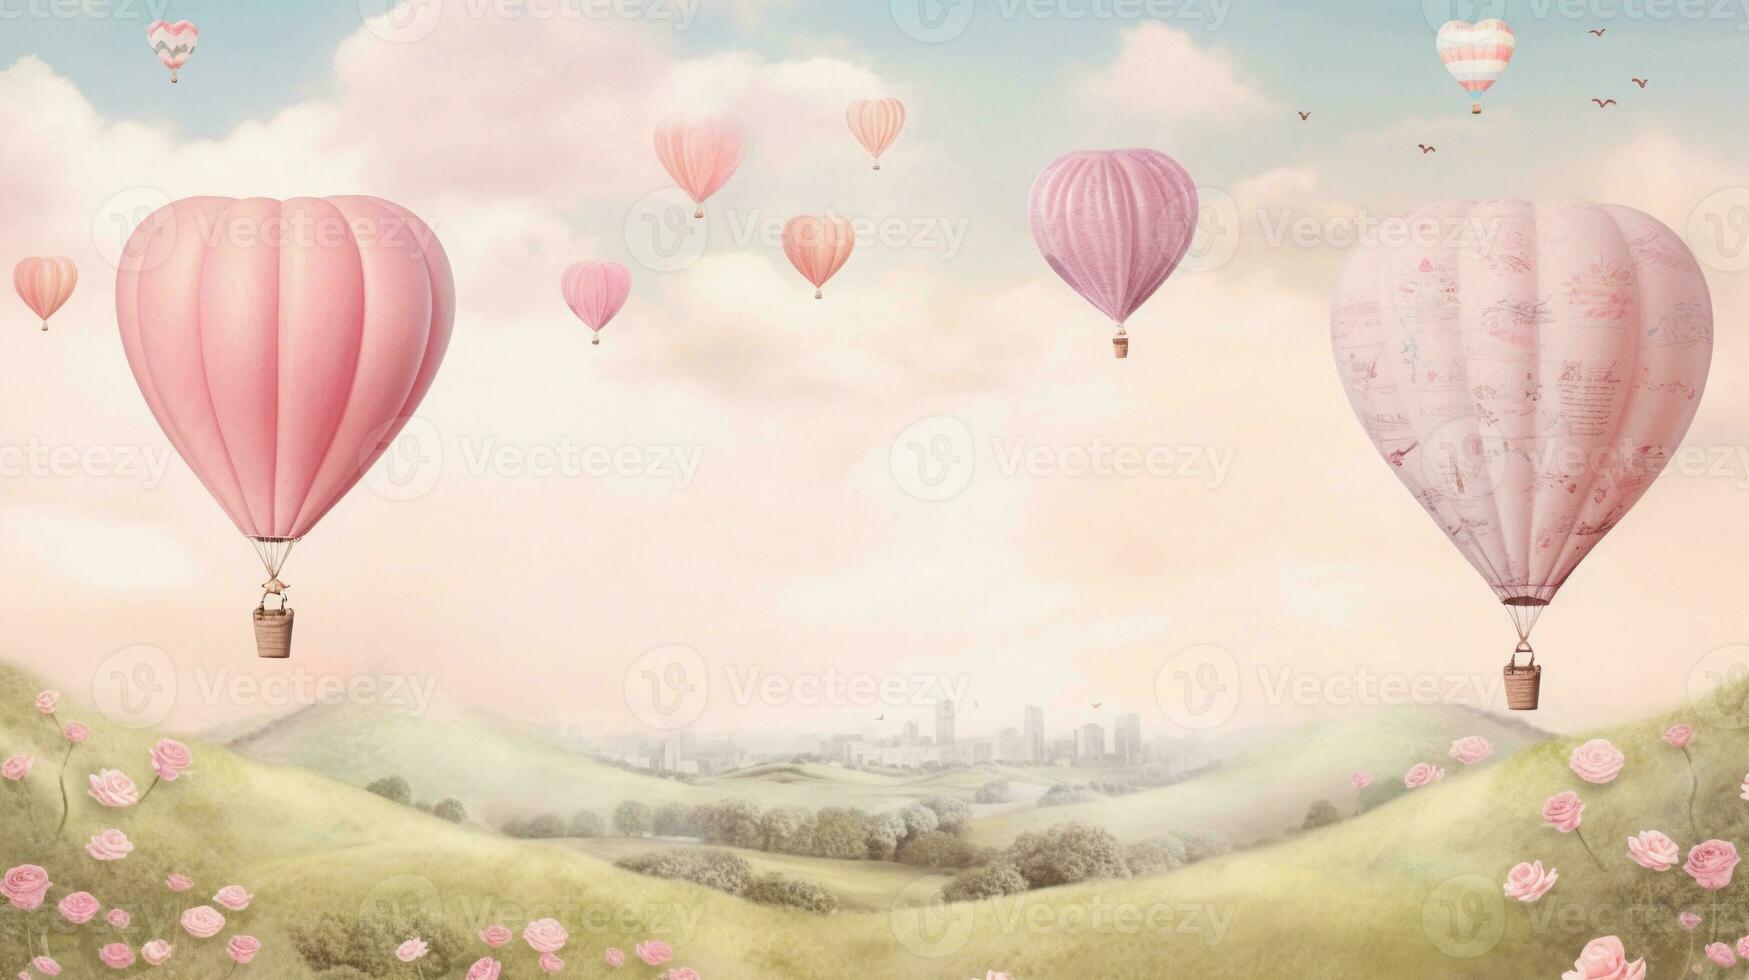 A whimsical scene featuring heart-shaped hot air balloons in soft pastel tones soaring above a pastel landscape, inviting text to capture the sense of adventure in love. AI generated photo